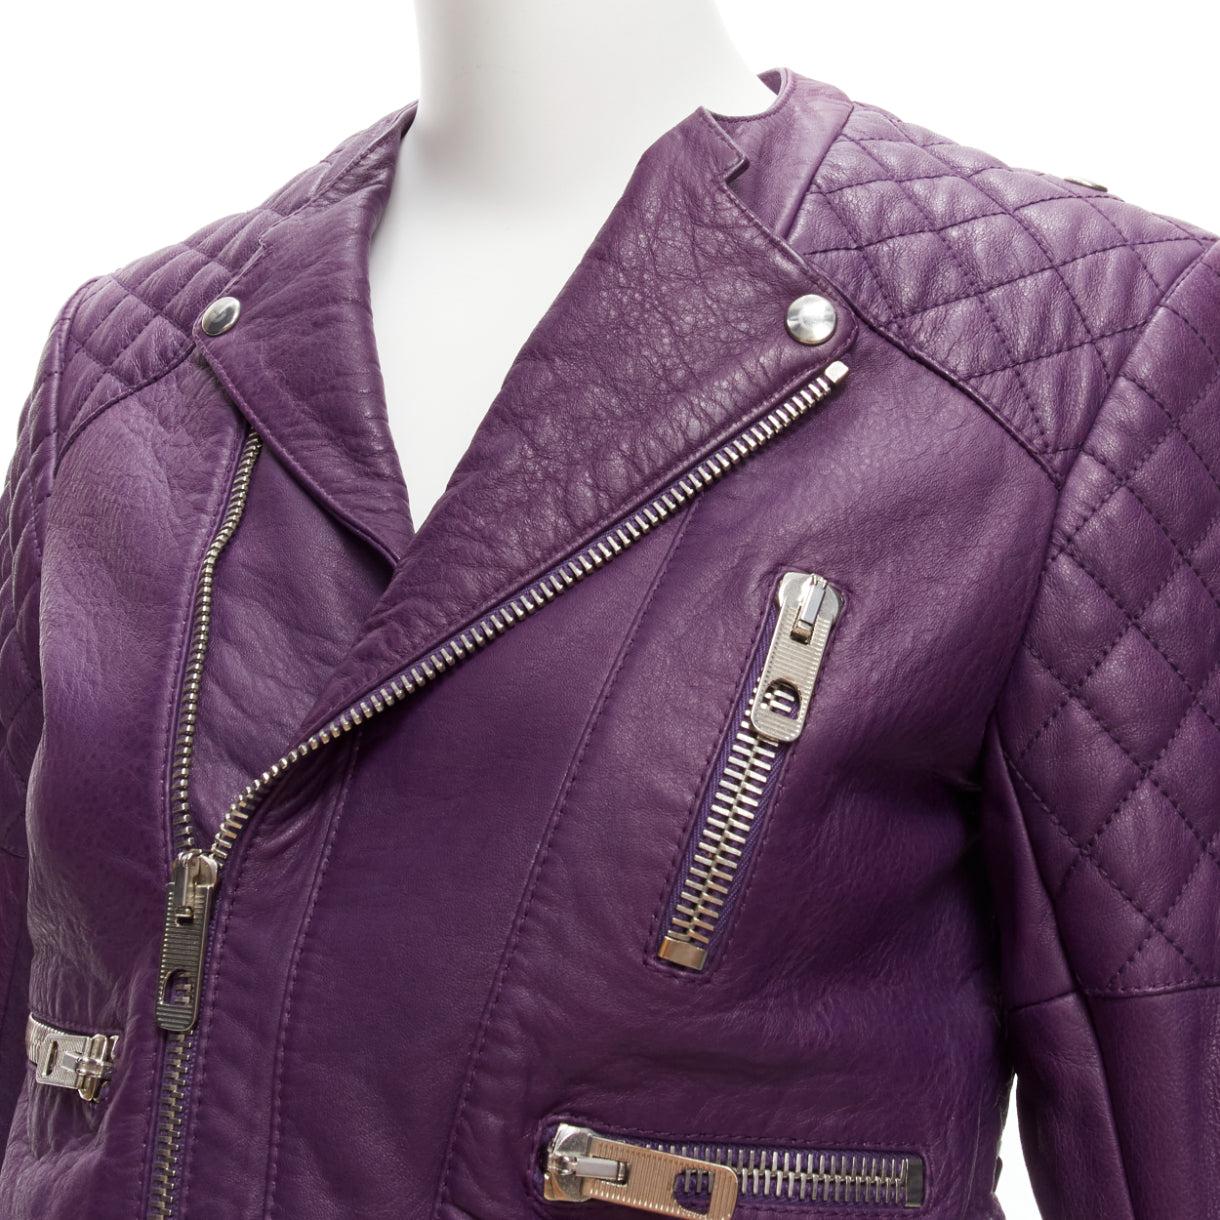 BALENCIAGA Nicolas Ghesquiere 2011 purple lambskin leather cropped moto biker jacket FR38 M
Reference: TGAS/D00669
Brand: Balenciaga
Designer: Nicolas Ghesquiere
Collection: Leather
Material: Lambskin Leather
Color: Purple
Pattern: Solid
Closure: